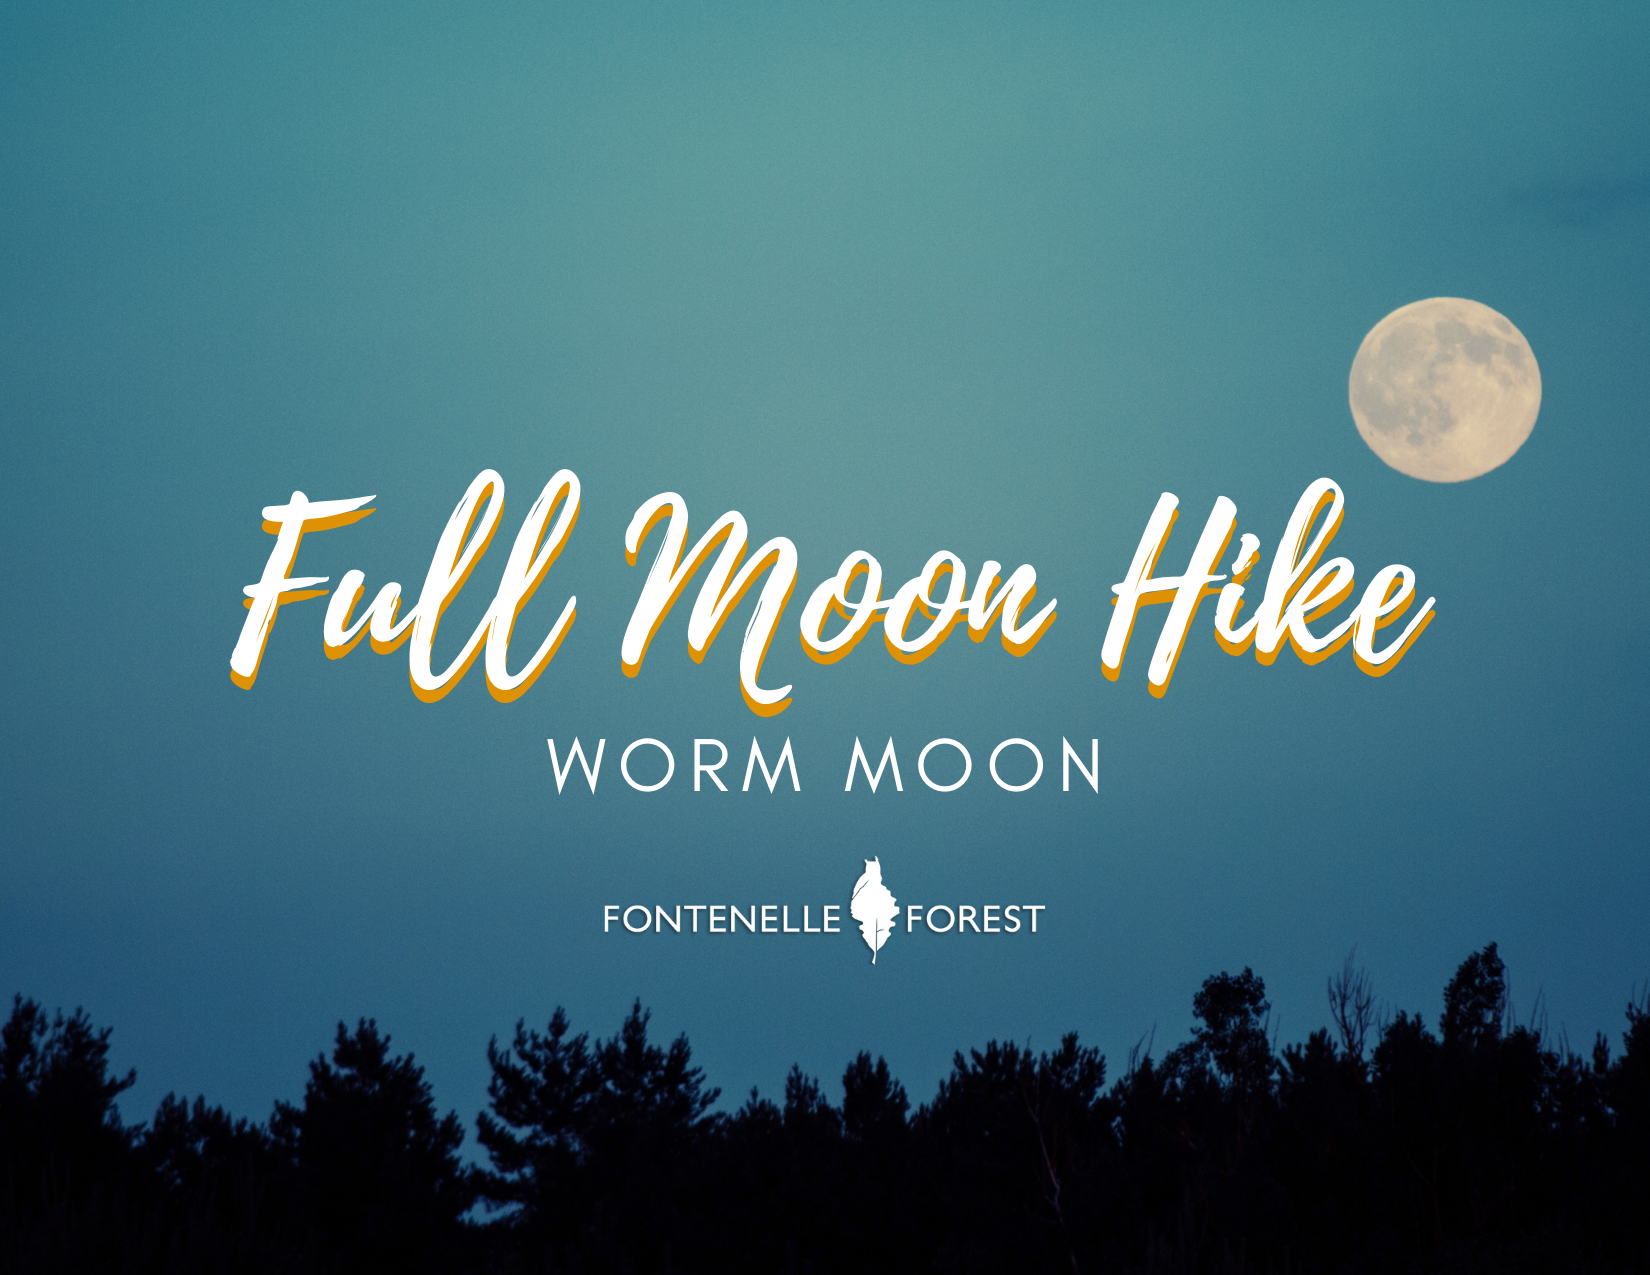 Pictures a dark blue sky at night with silhouettes of trees and a full moon. The text in cream is "Full Moon Hike" then on the next line "WORM MOON", with the Fontenelle Forest logo in white underneath.